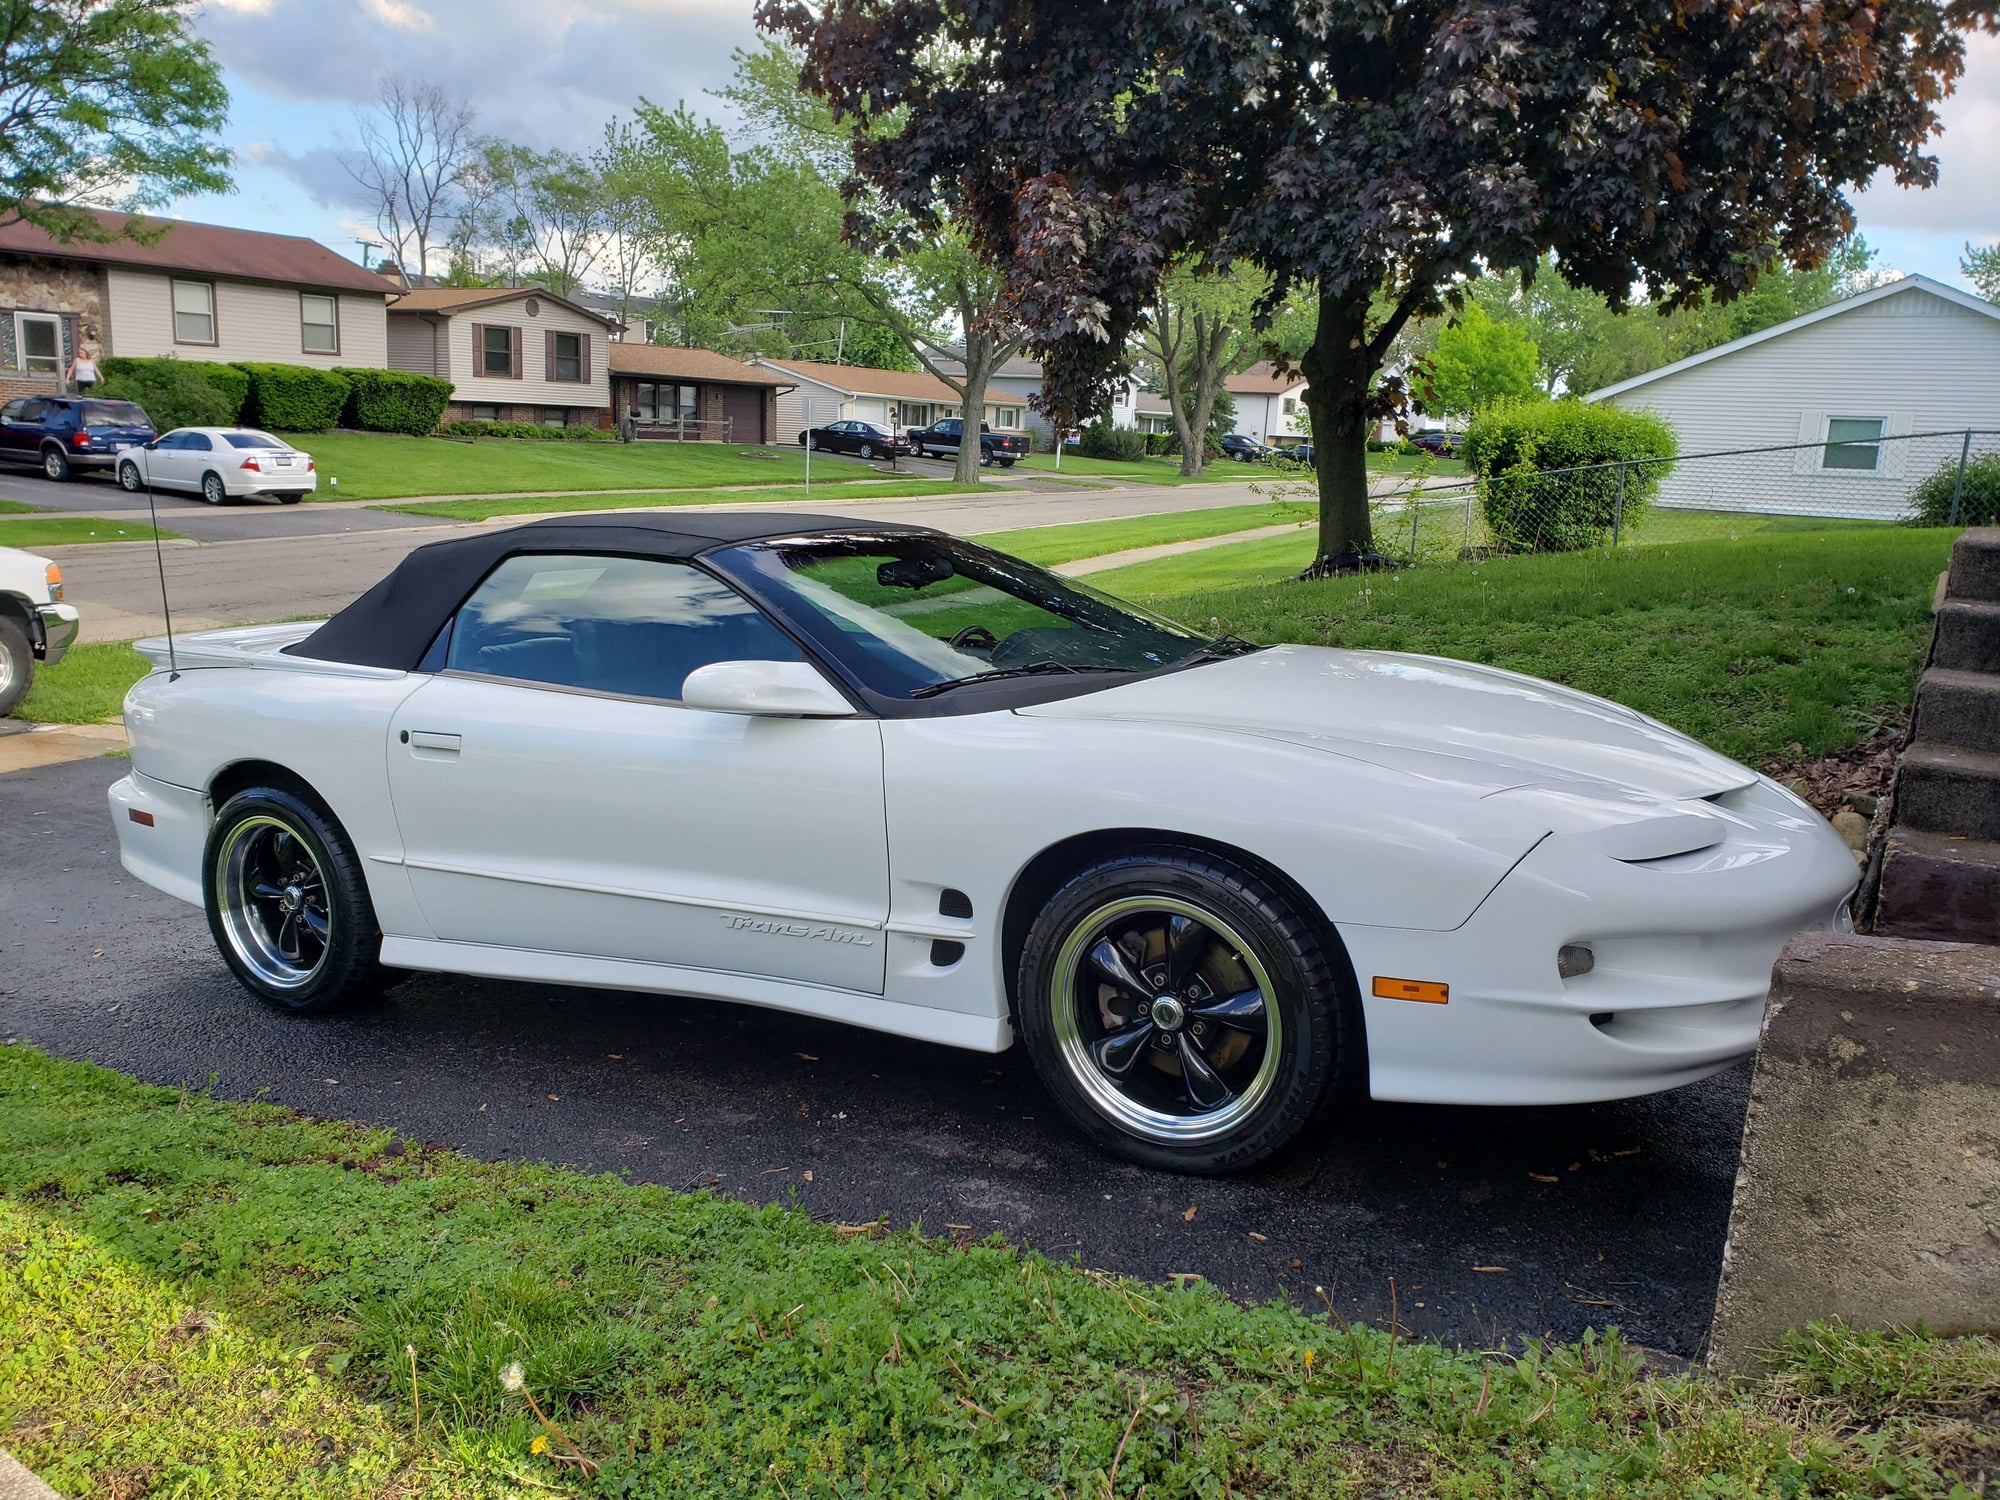 1998 Pontiac Firebird - 1998 Pontiac Trans am convertible unmolested all stock - Used - VIN 2G2FV32GXW2219177 - 119,000 Miles - 8 cyl - 2WD - Automatic - Convertible - White - Hanover Park, IL 60133, United States